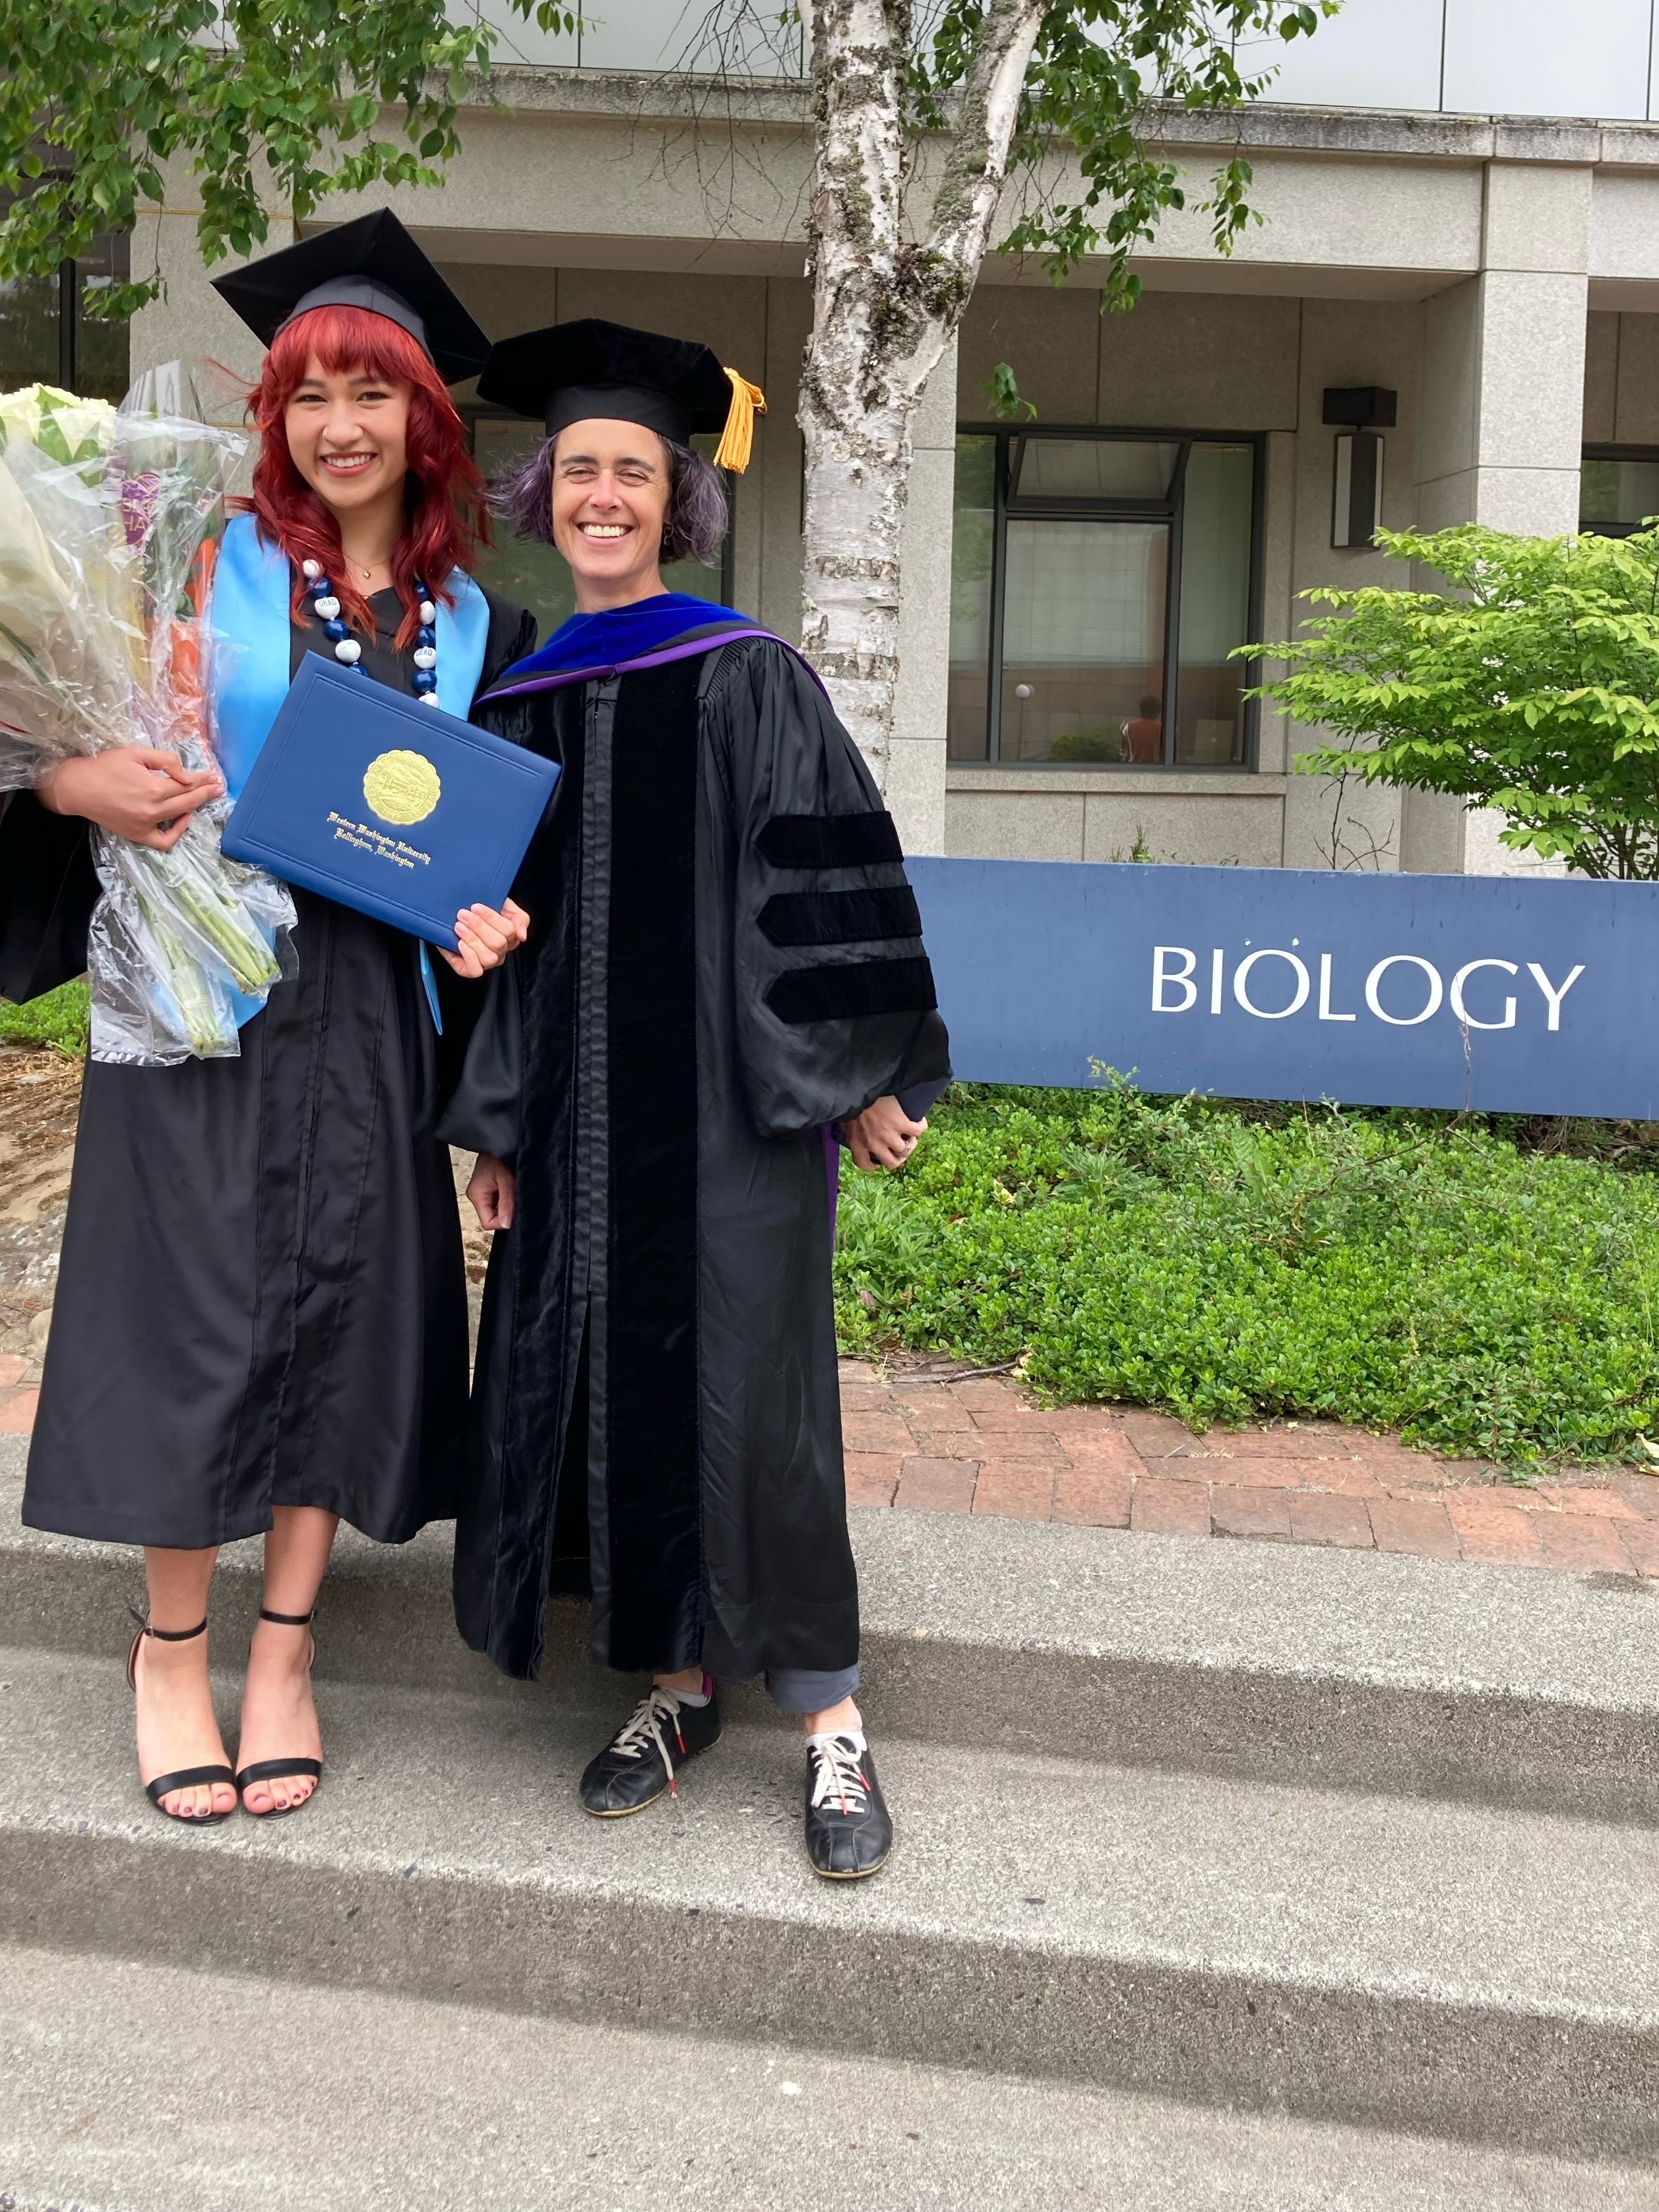 Graduate and faculty member in cap and gown stand in front of the Biology building sign. Graduate is holding diploma and flowers.